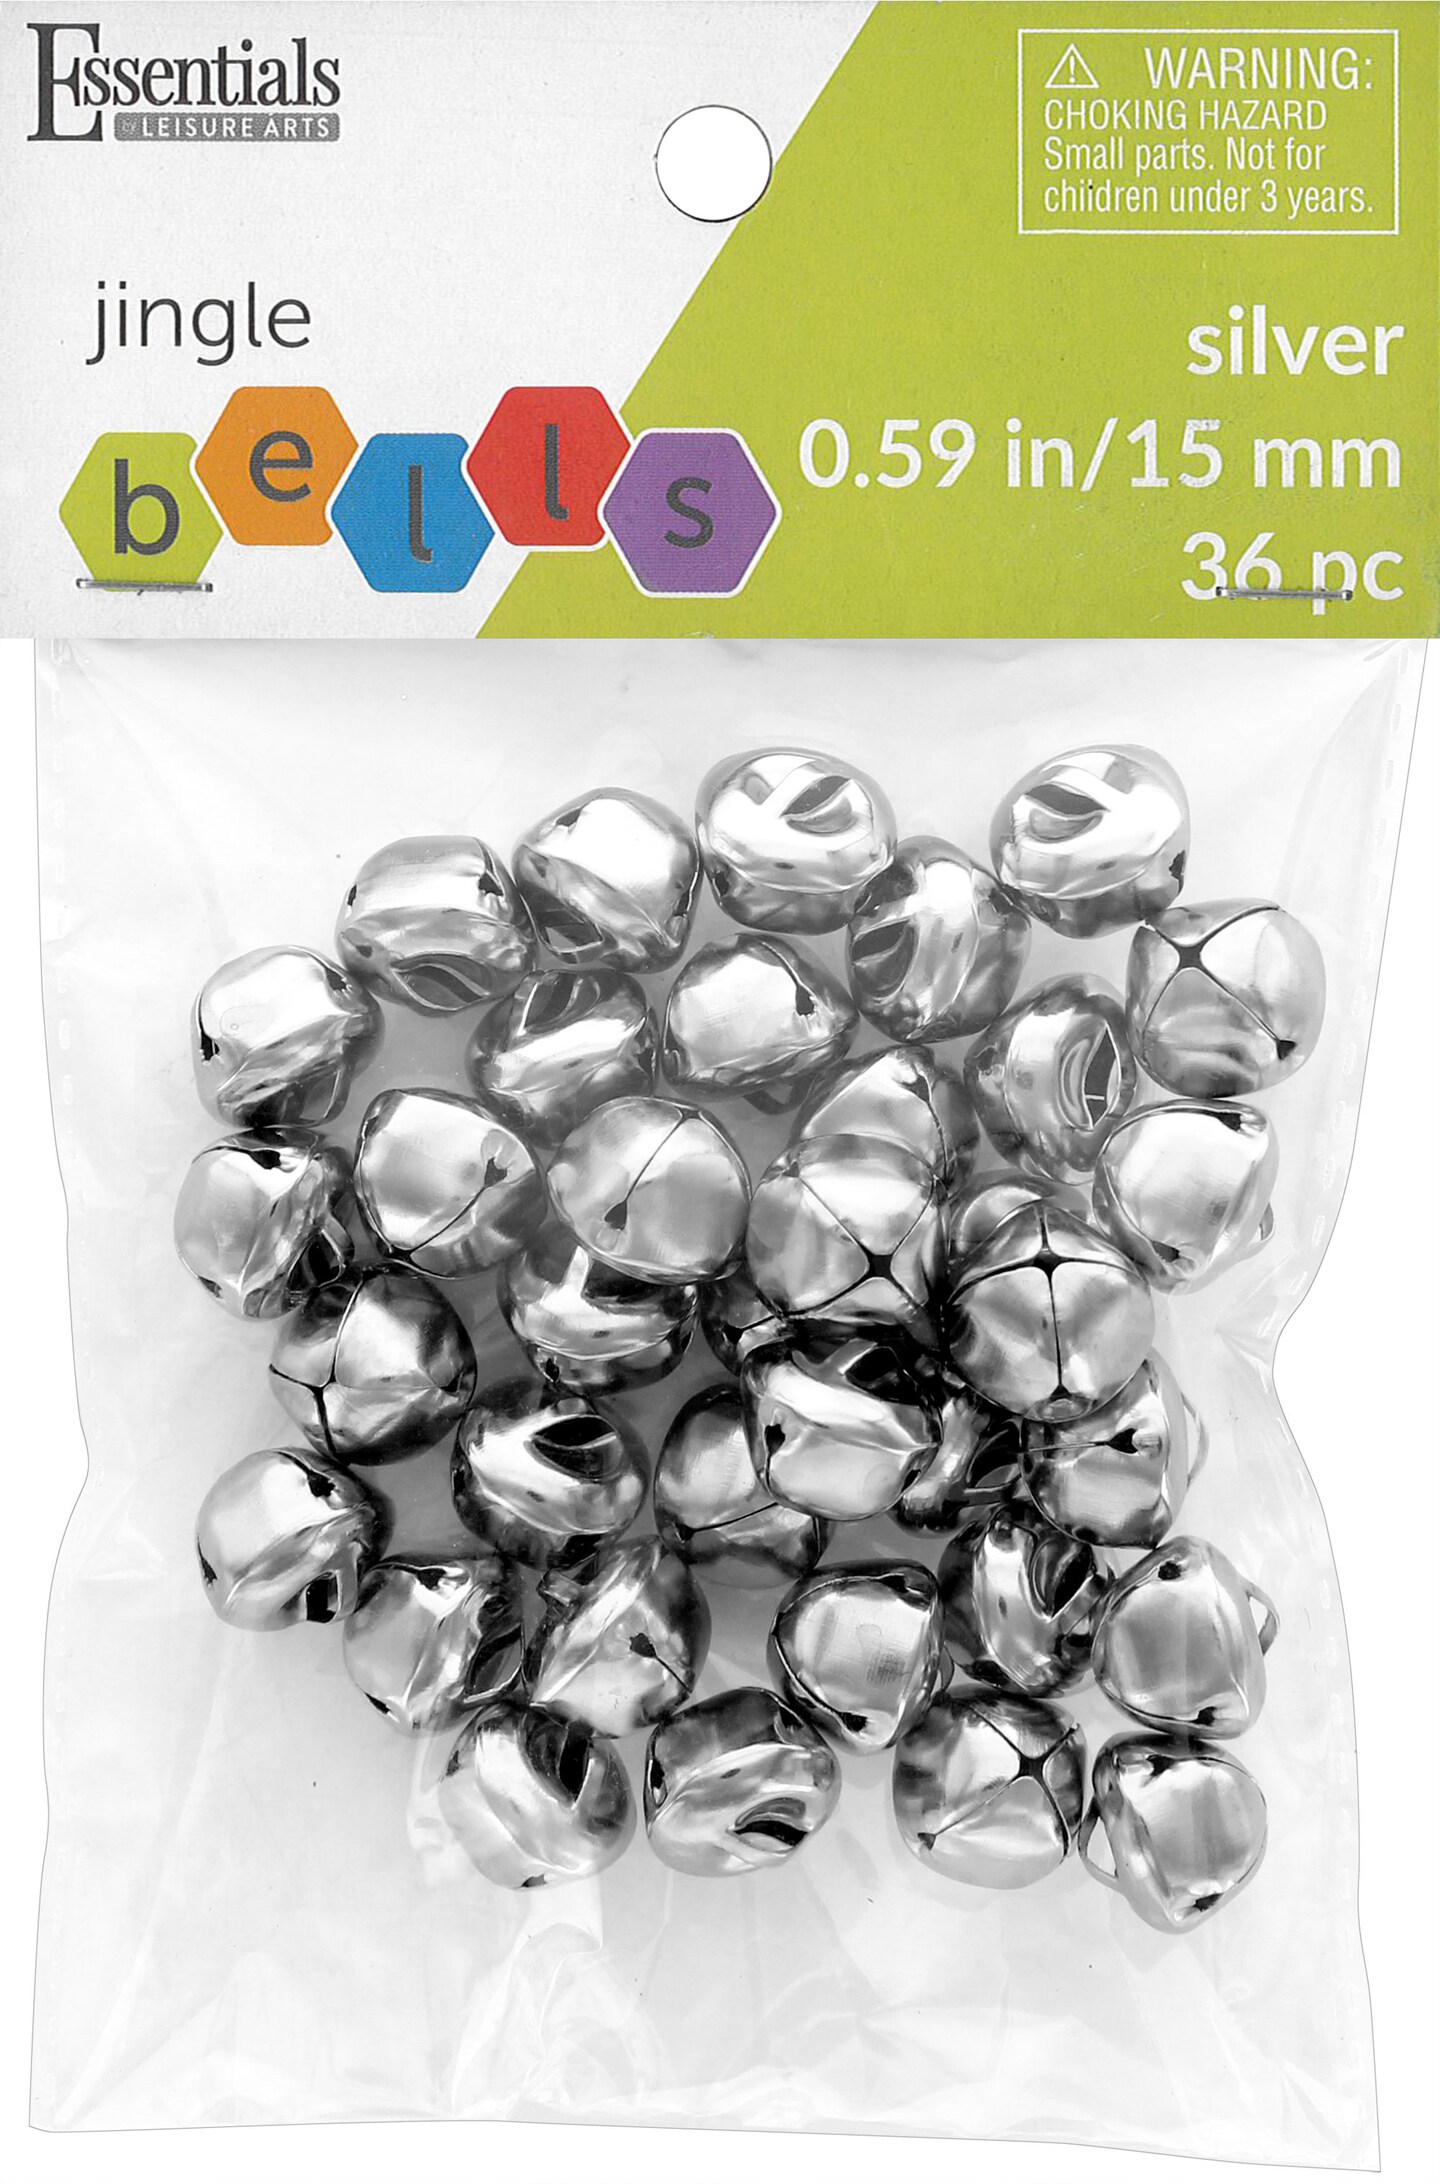 Essentials By Leisure Arts Arts Jingle Bells 15mm Silver 36pc